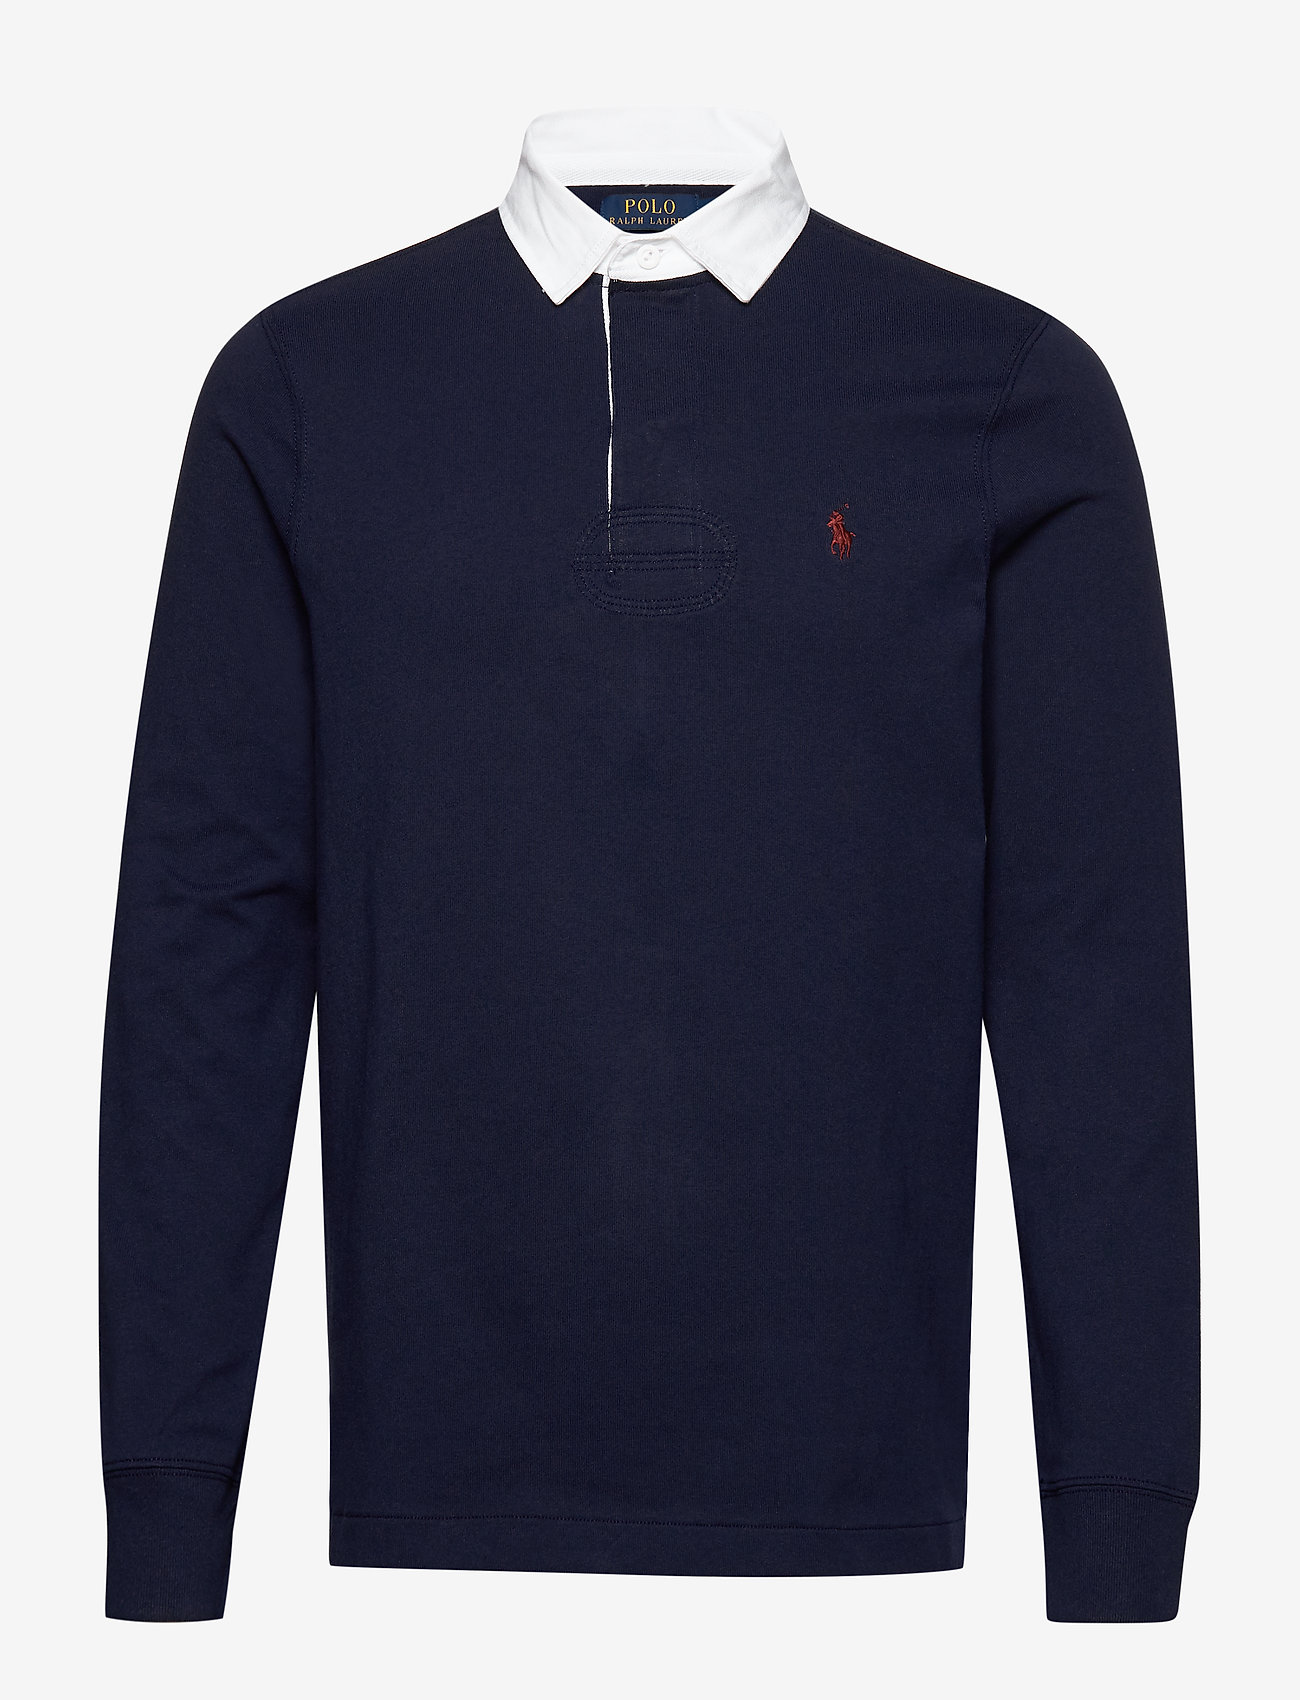 polo rugby sweater